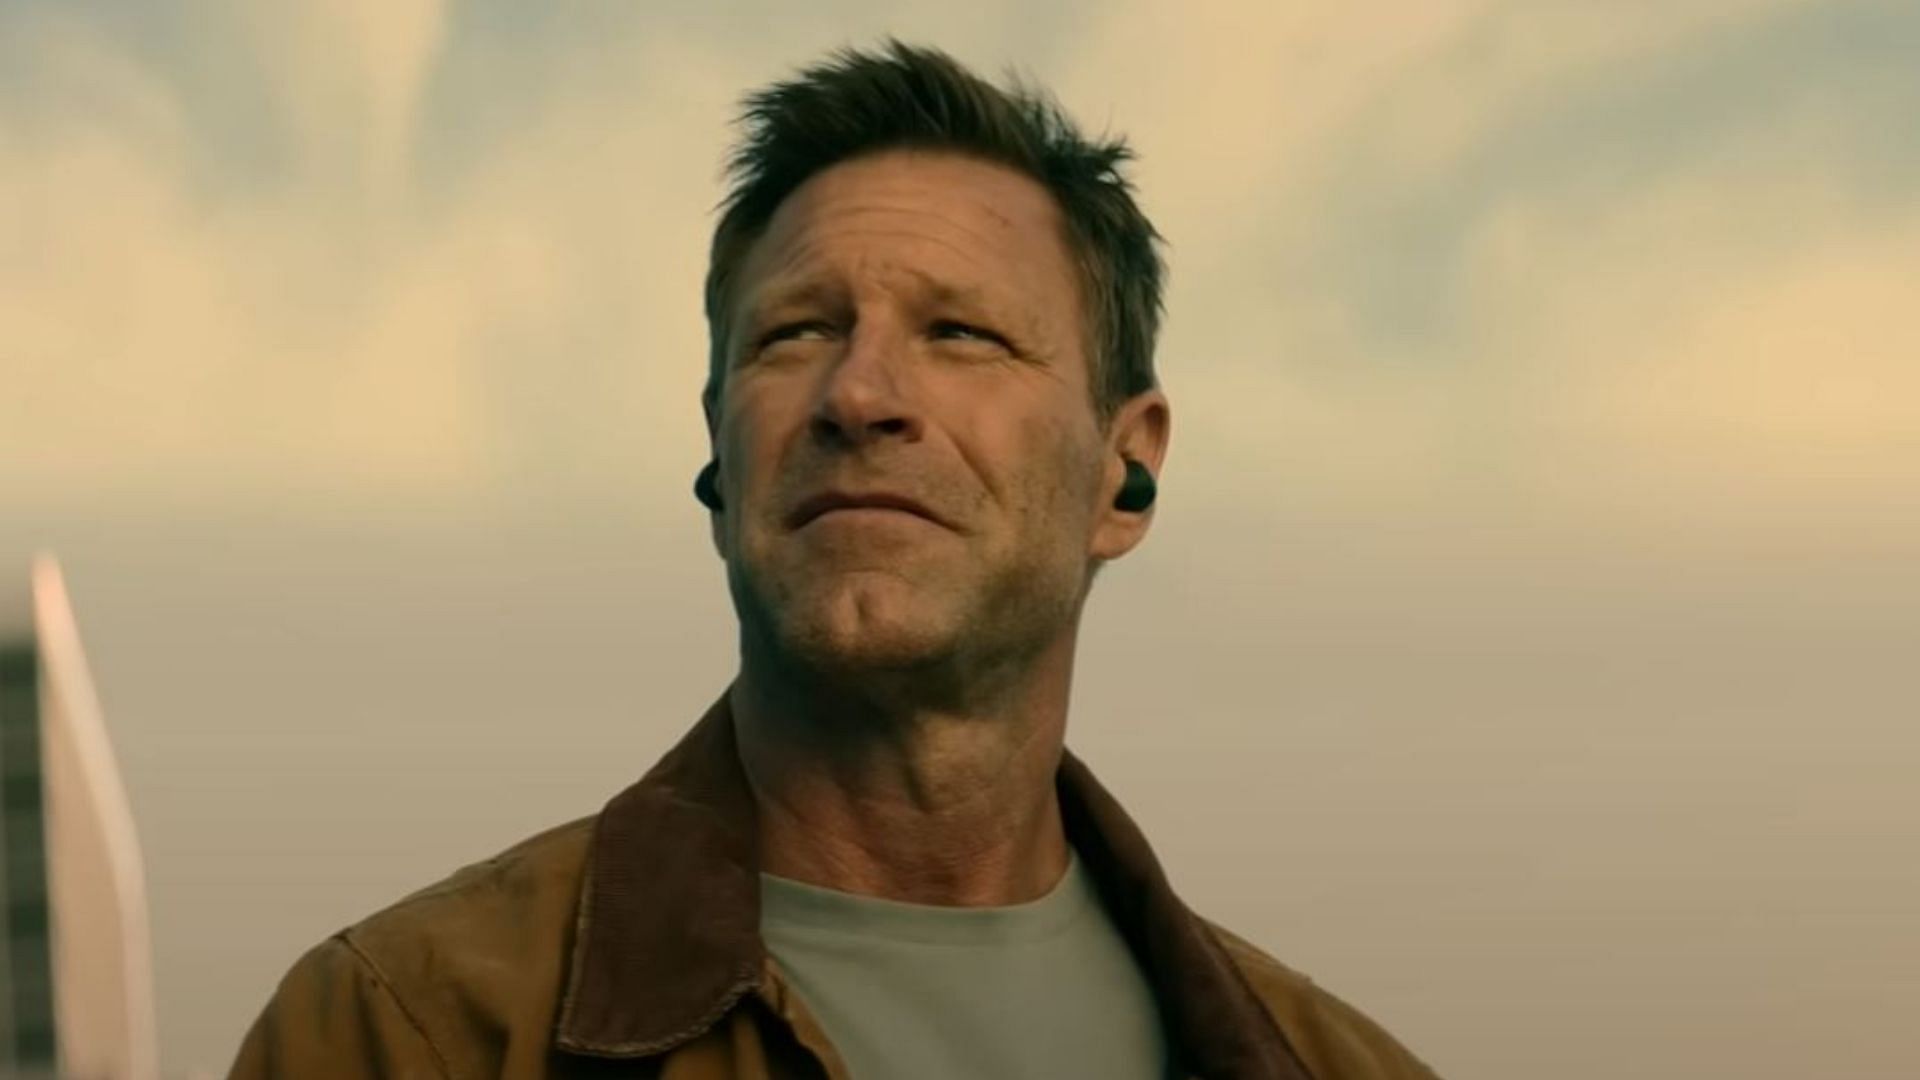 The Bricklayer review: Aaron Eckhart impresses in bland action thriller. (Image via Vertical)ia 